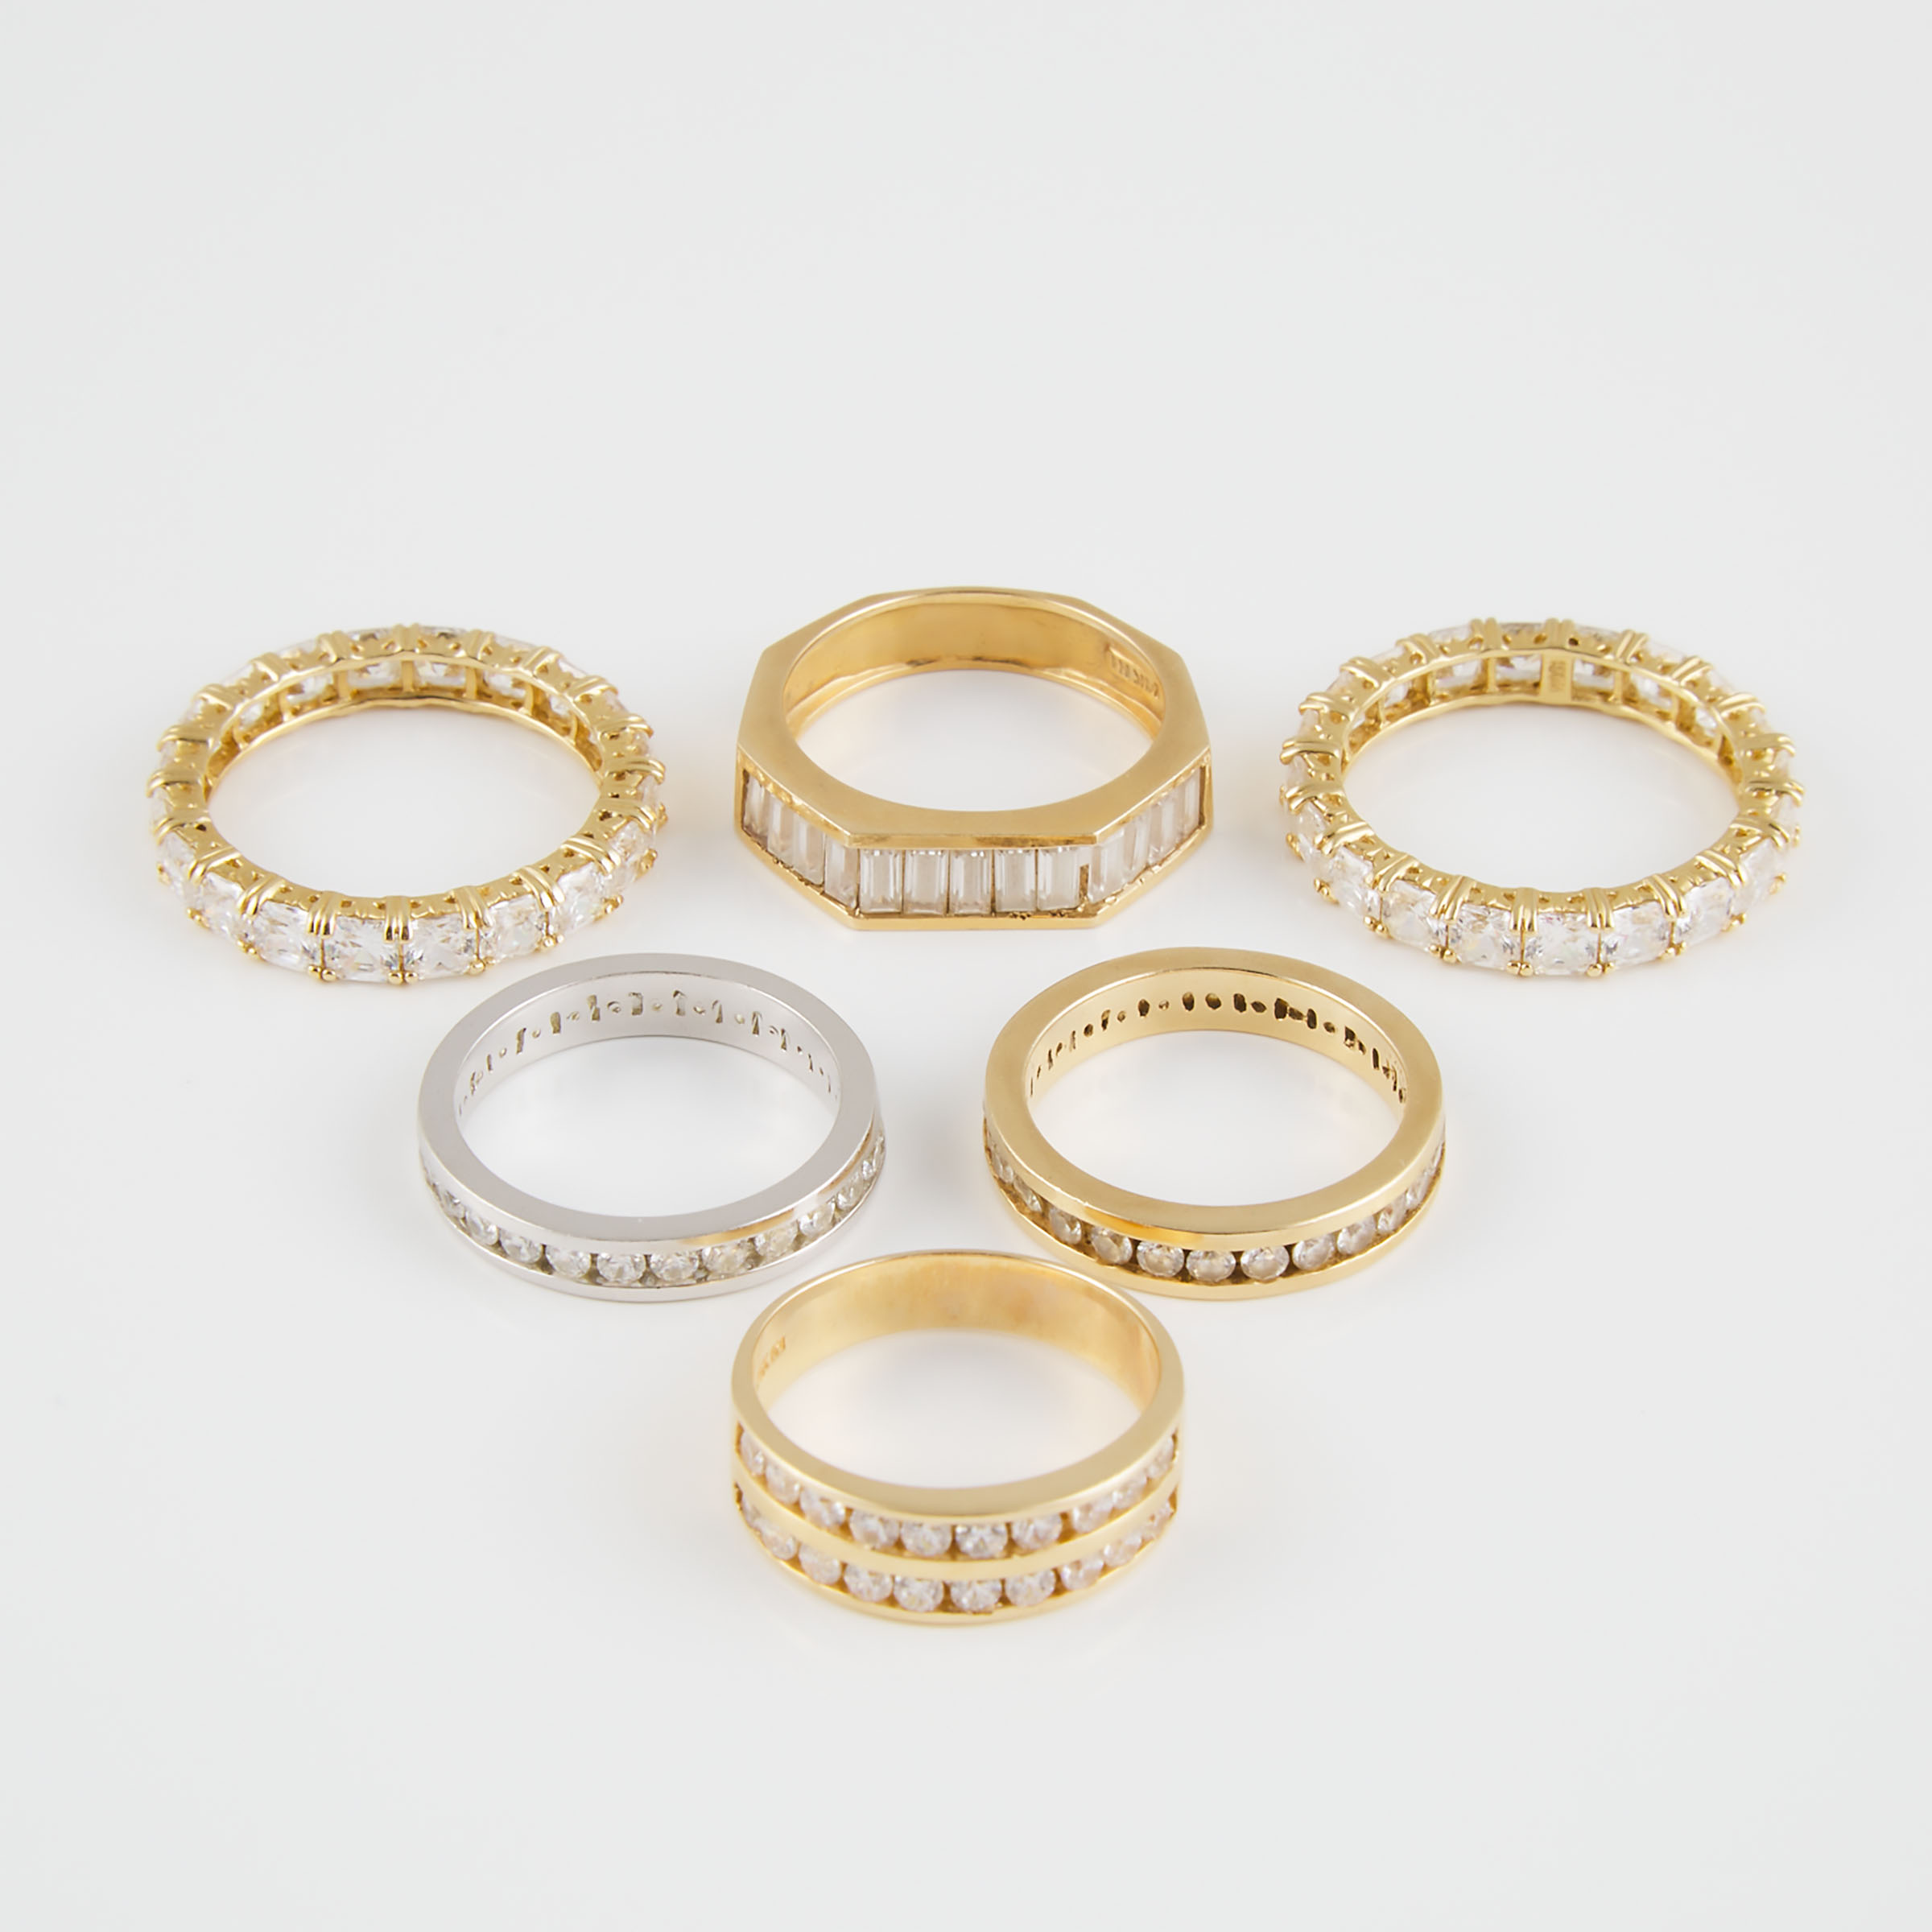 6 x 14k Yellow And White Gold Bands